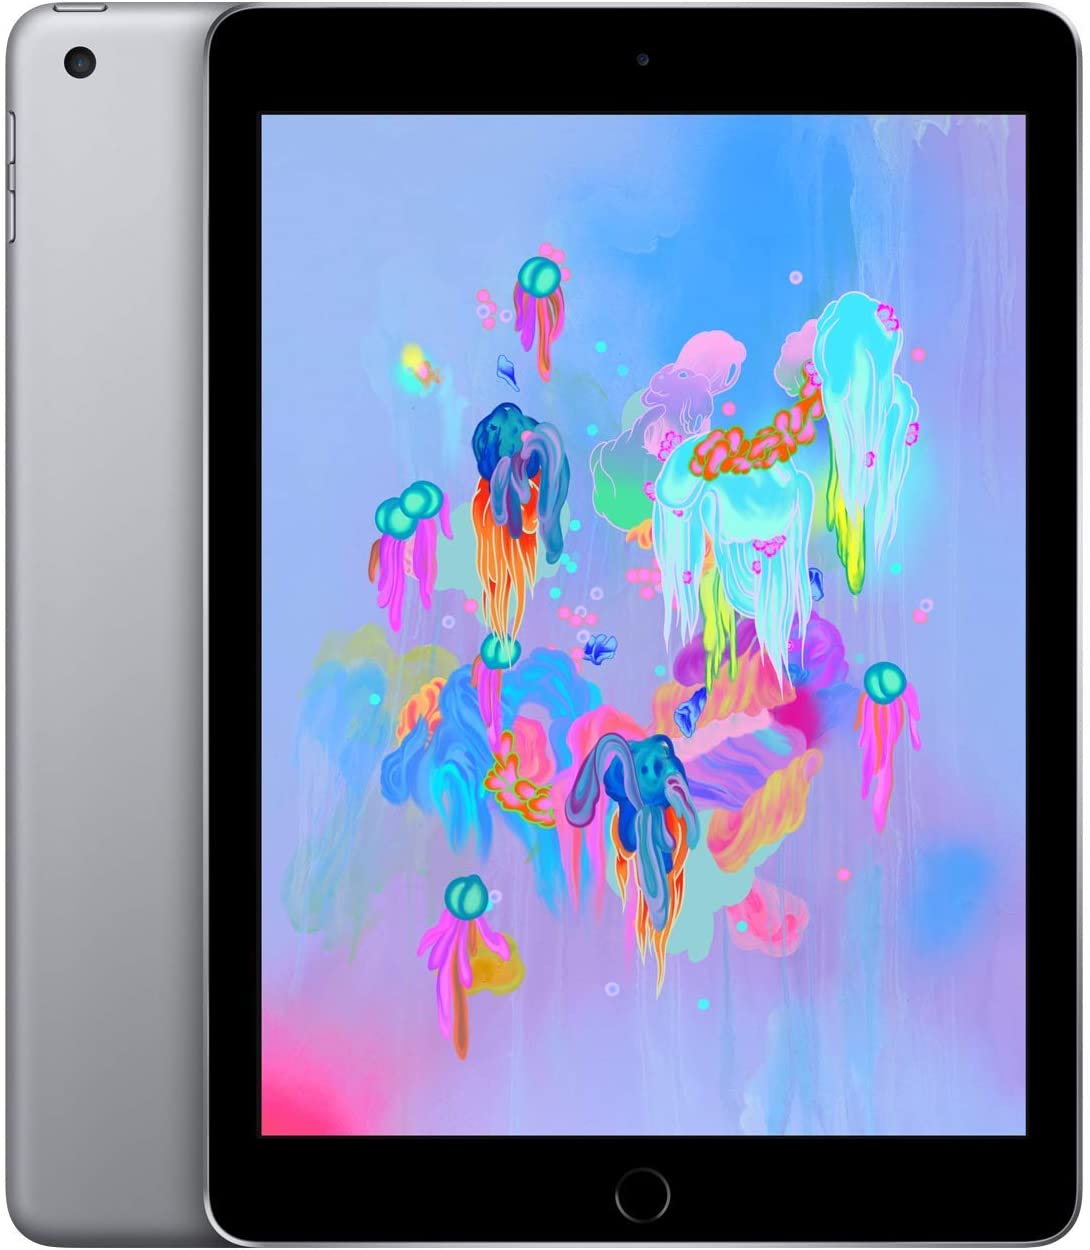 Apple iPad 6 128GB Wi-Fi (Touch ID) Free Shipping, New Case & Glass Screen Protector*